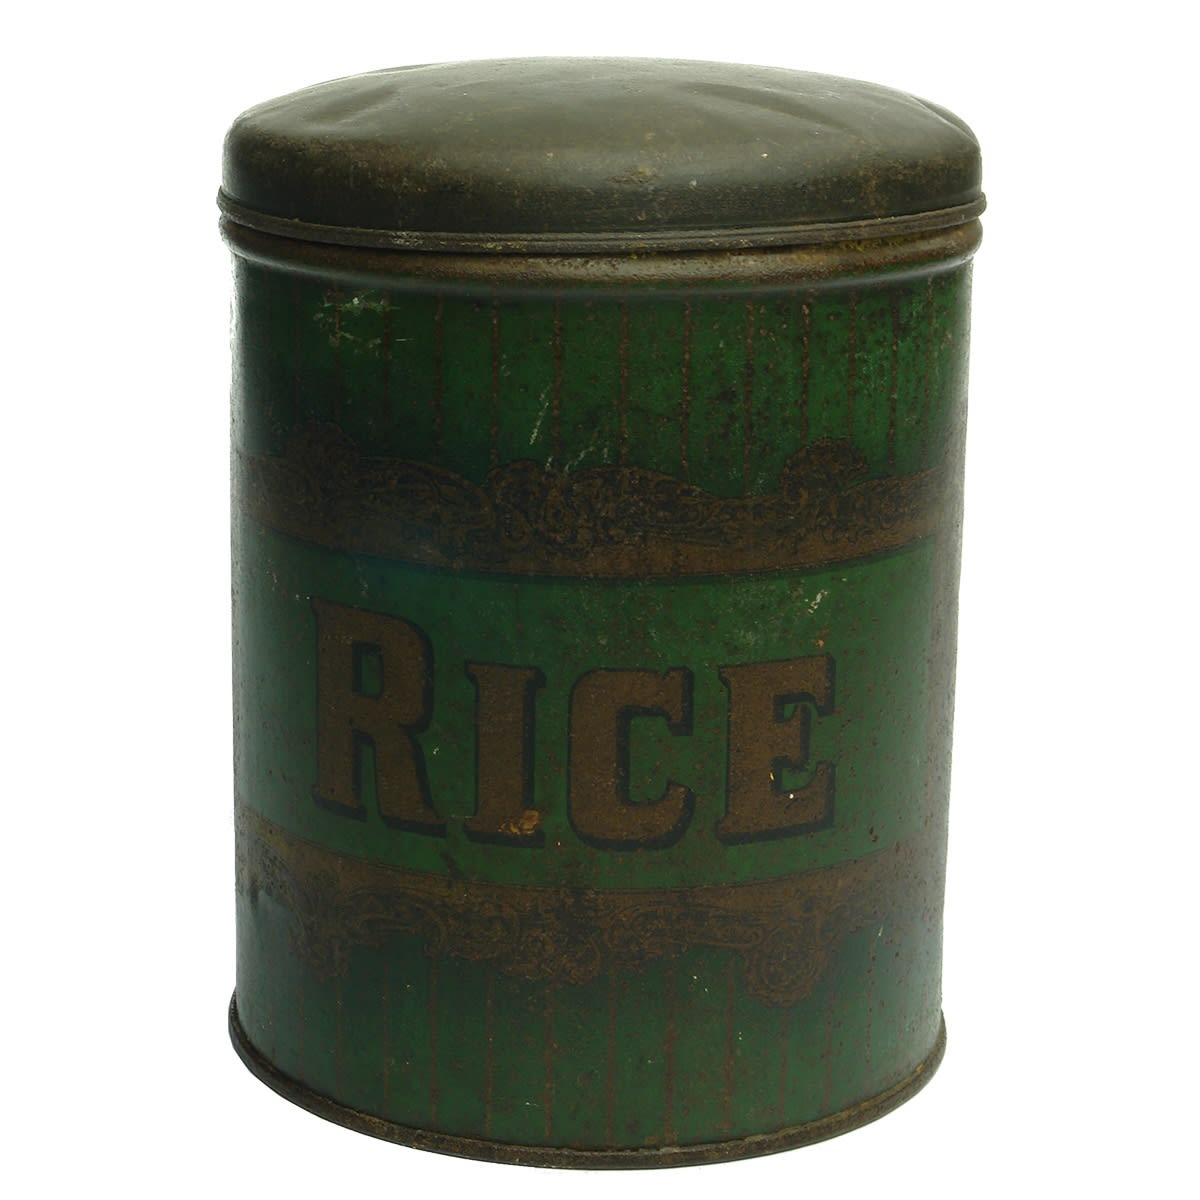 Rice Tin. Green background with stripes. Original lid.